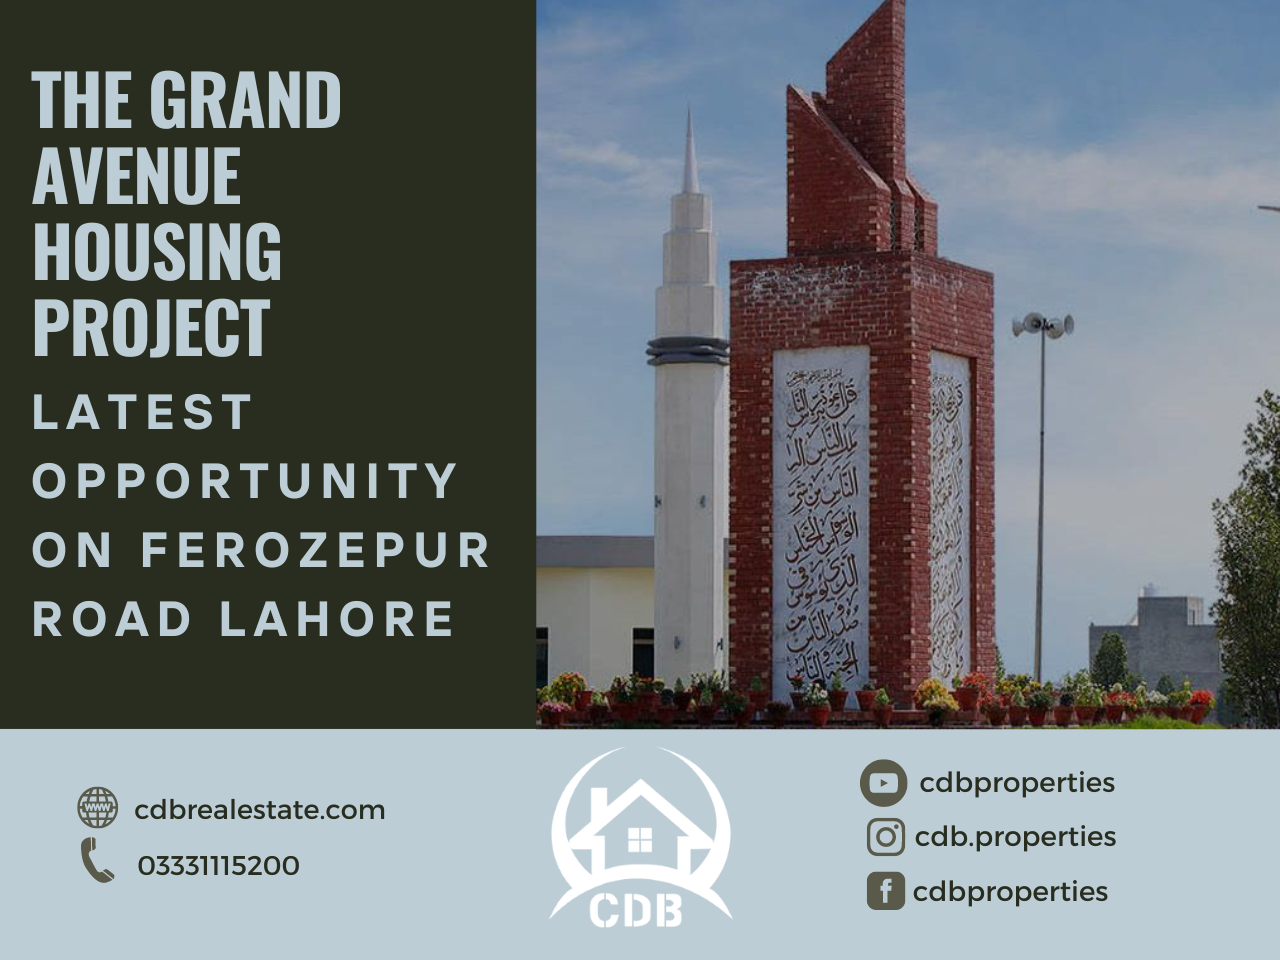 The Grand Avenue Housing Project: Latest Opportunity on Ferozepur Road Lahore